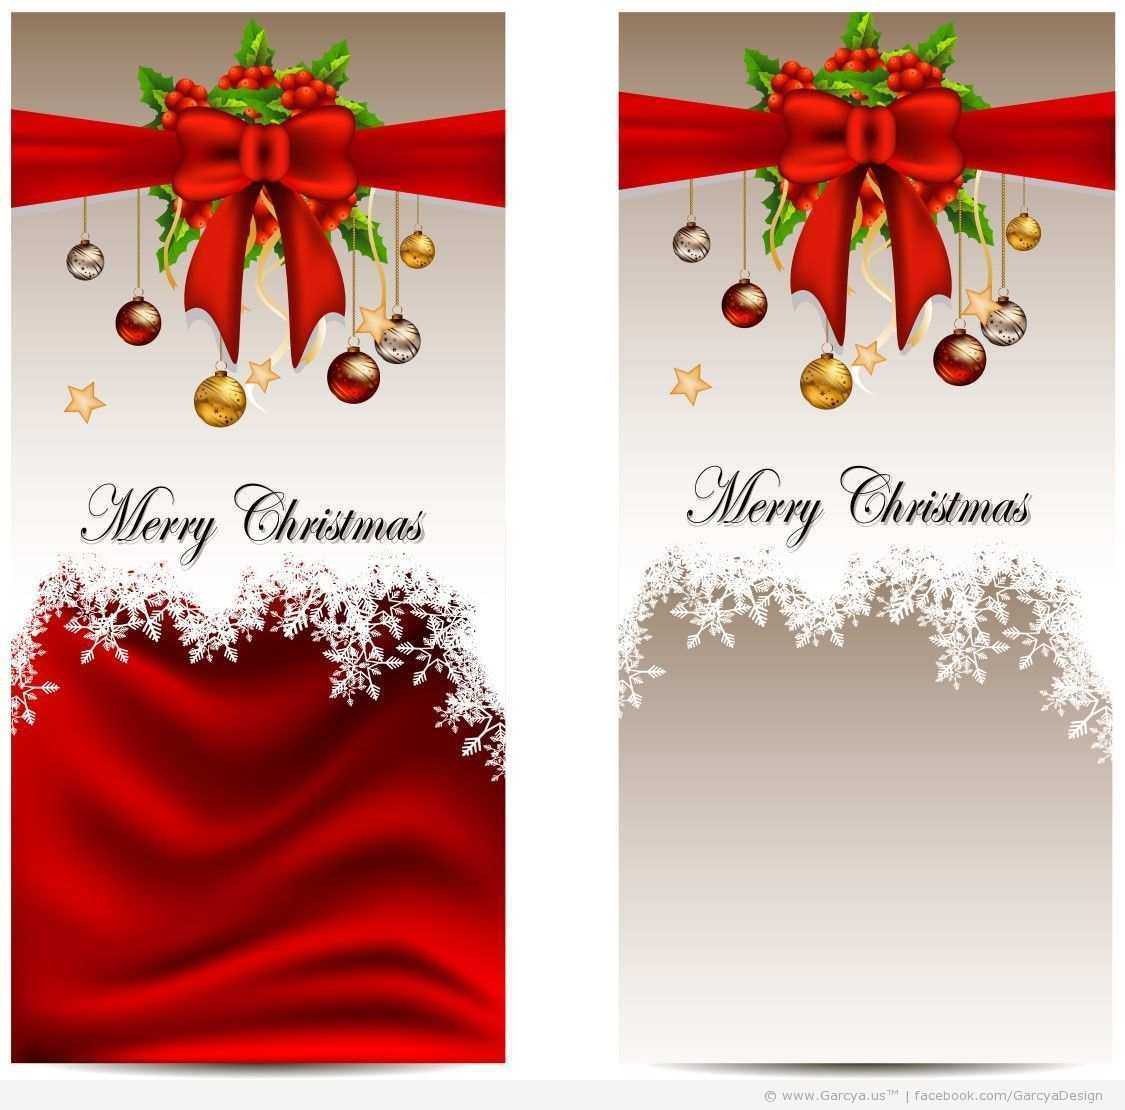 19 Standard Christmas Greeting Card Template Free Download In Christmas Photo Cards Templates Free Downloads